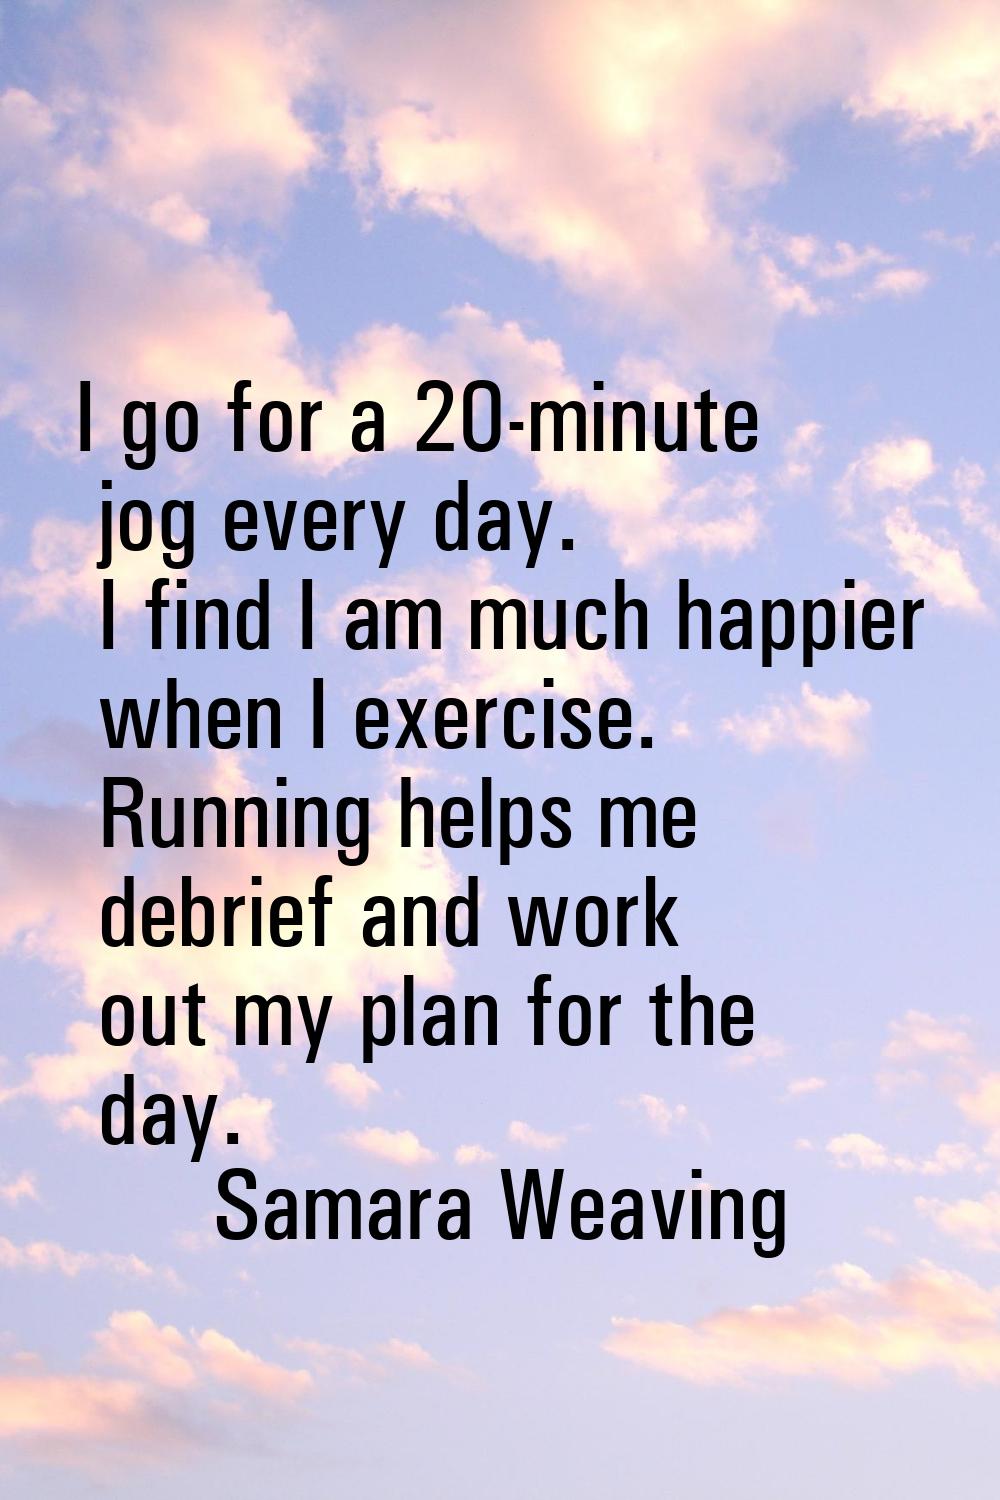 I go for a 20-minute jog every day. I find I am much happier when I exercise. Running helps me debr